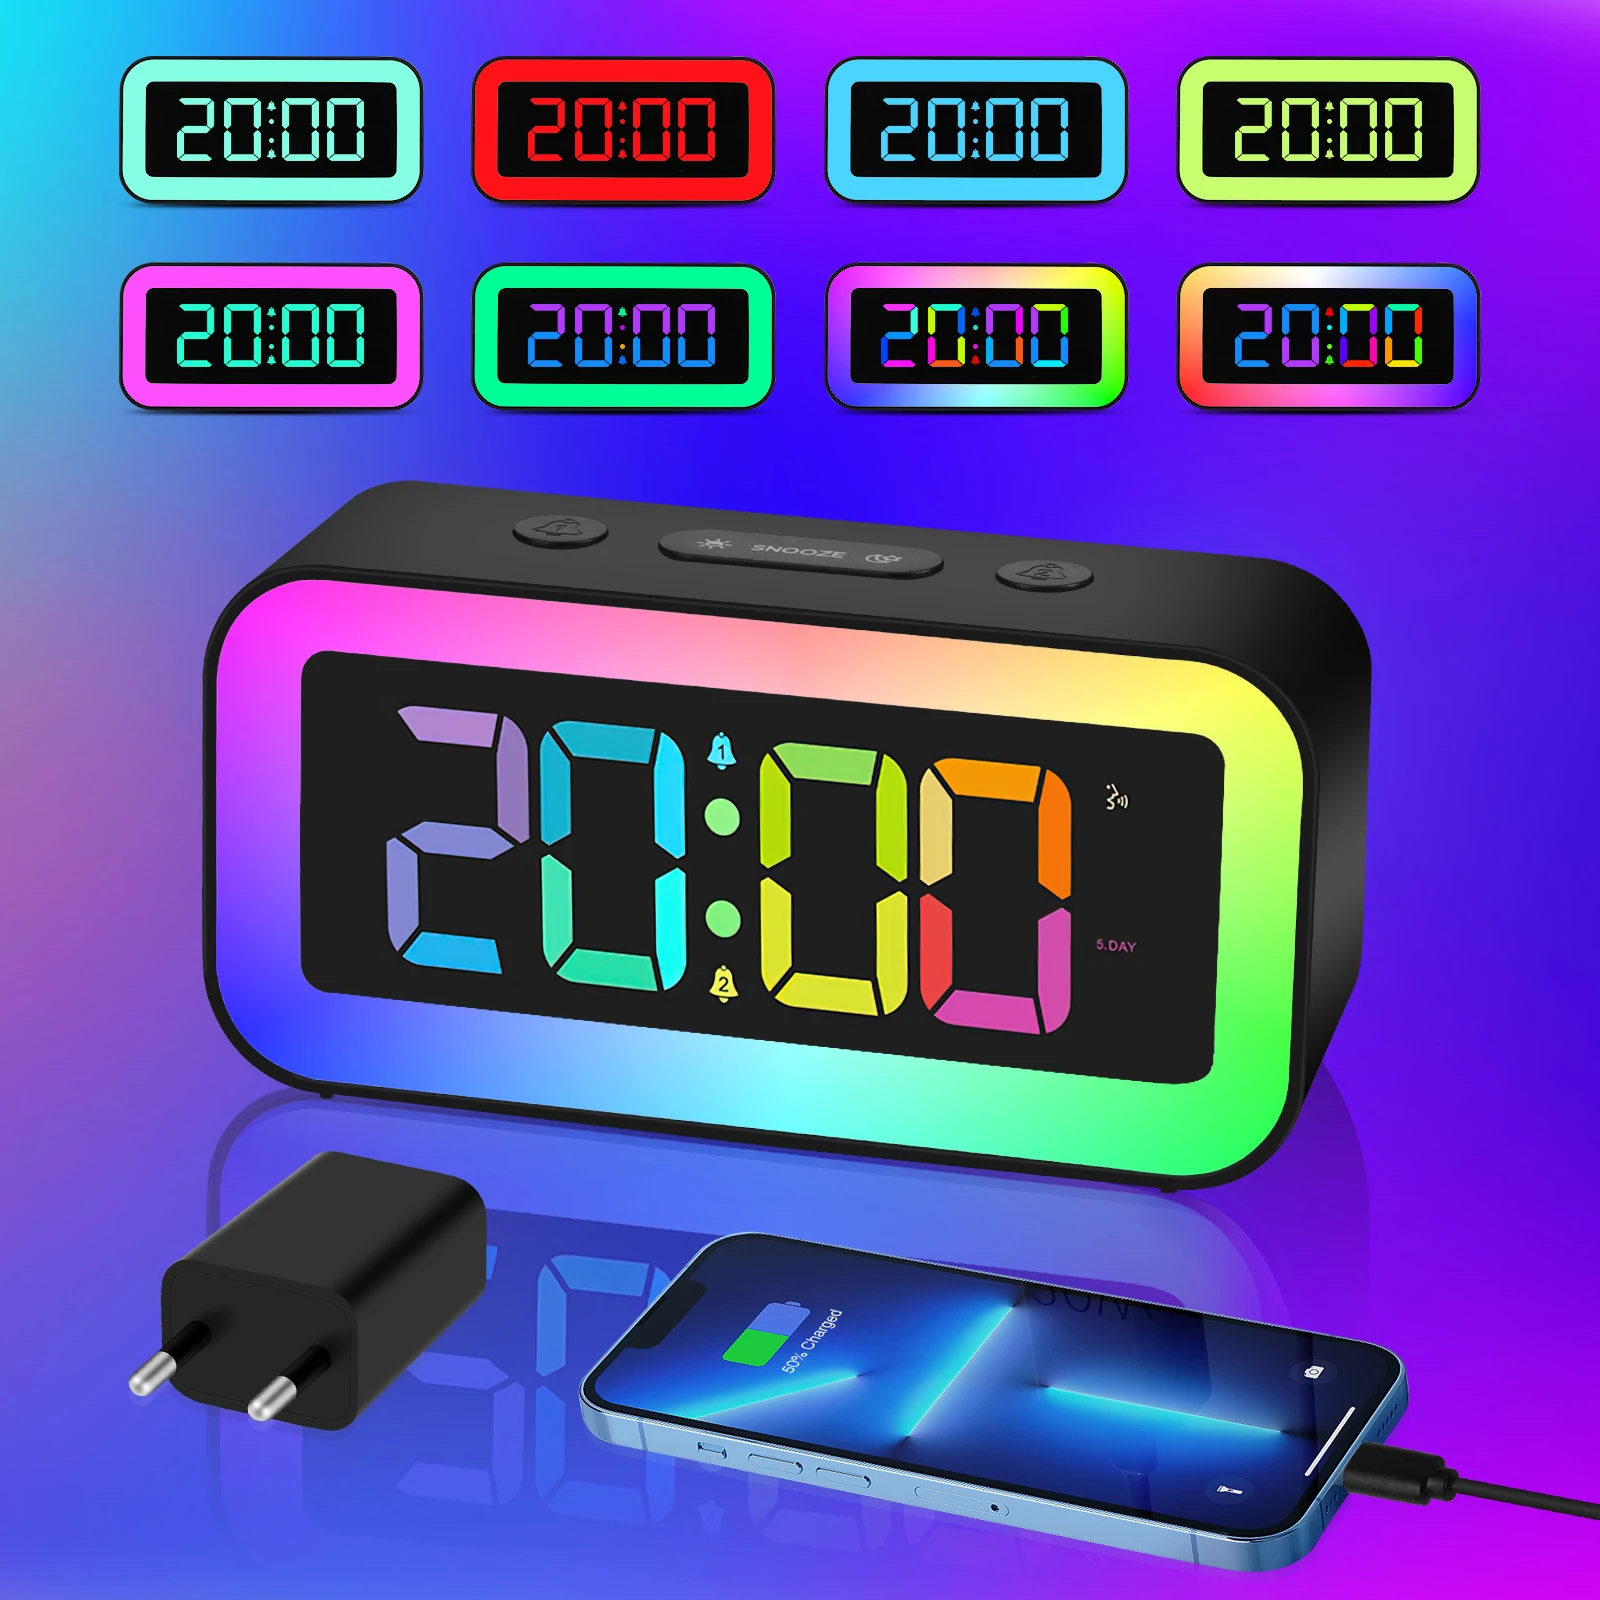 

LED Digital Alarm Clock RGB Magic Night Light Function Rechargeable Dimmable Snooze Modes Clocks Christmas Decorations For Home